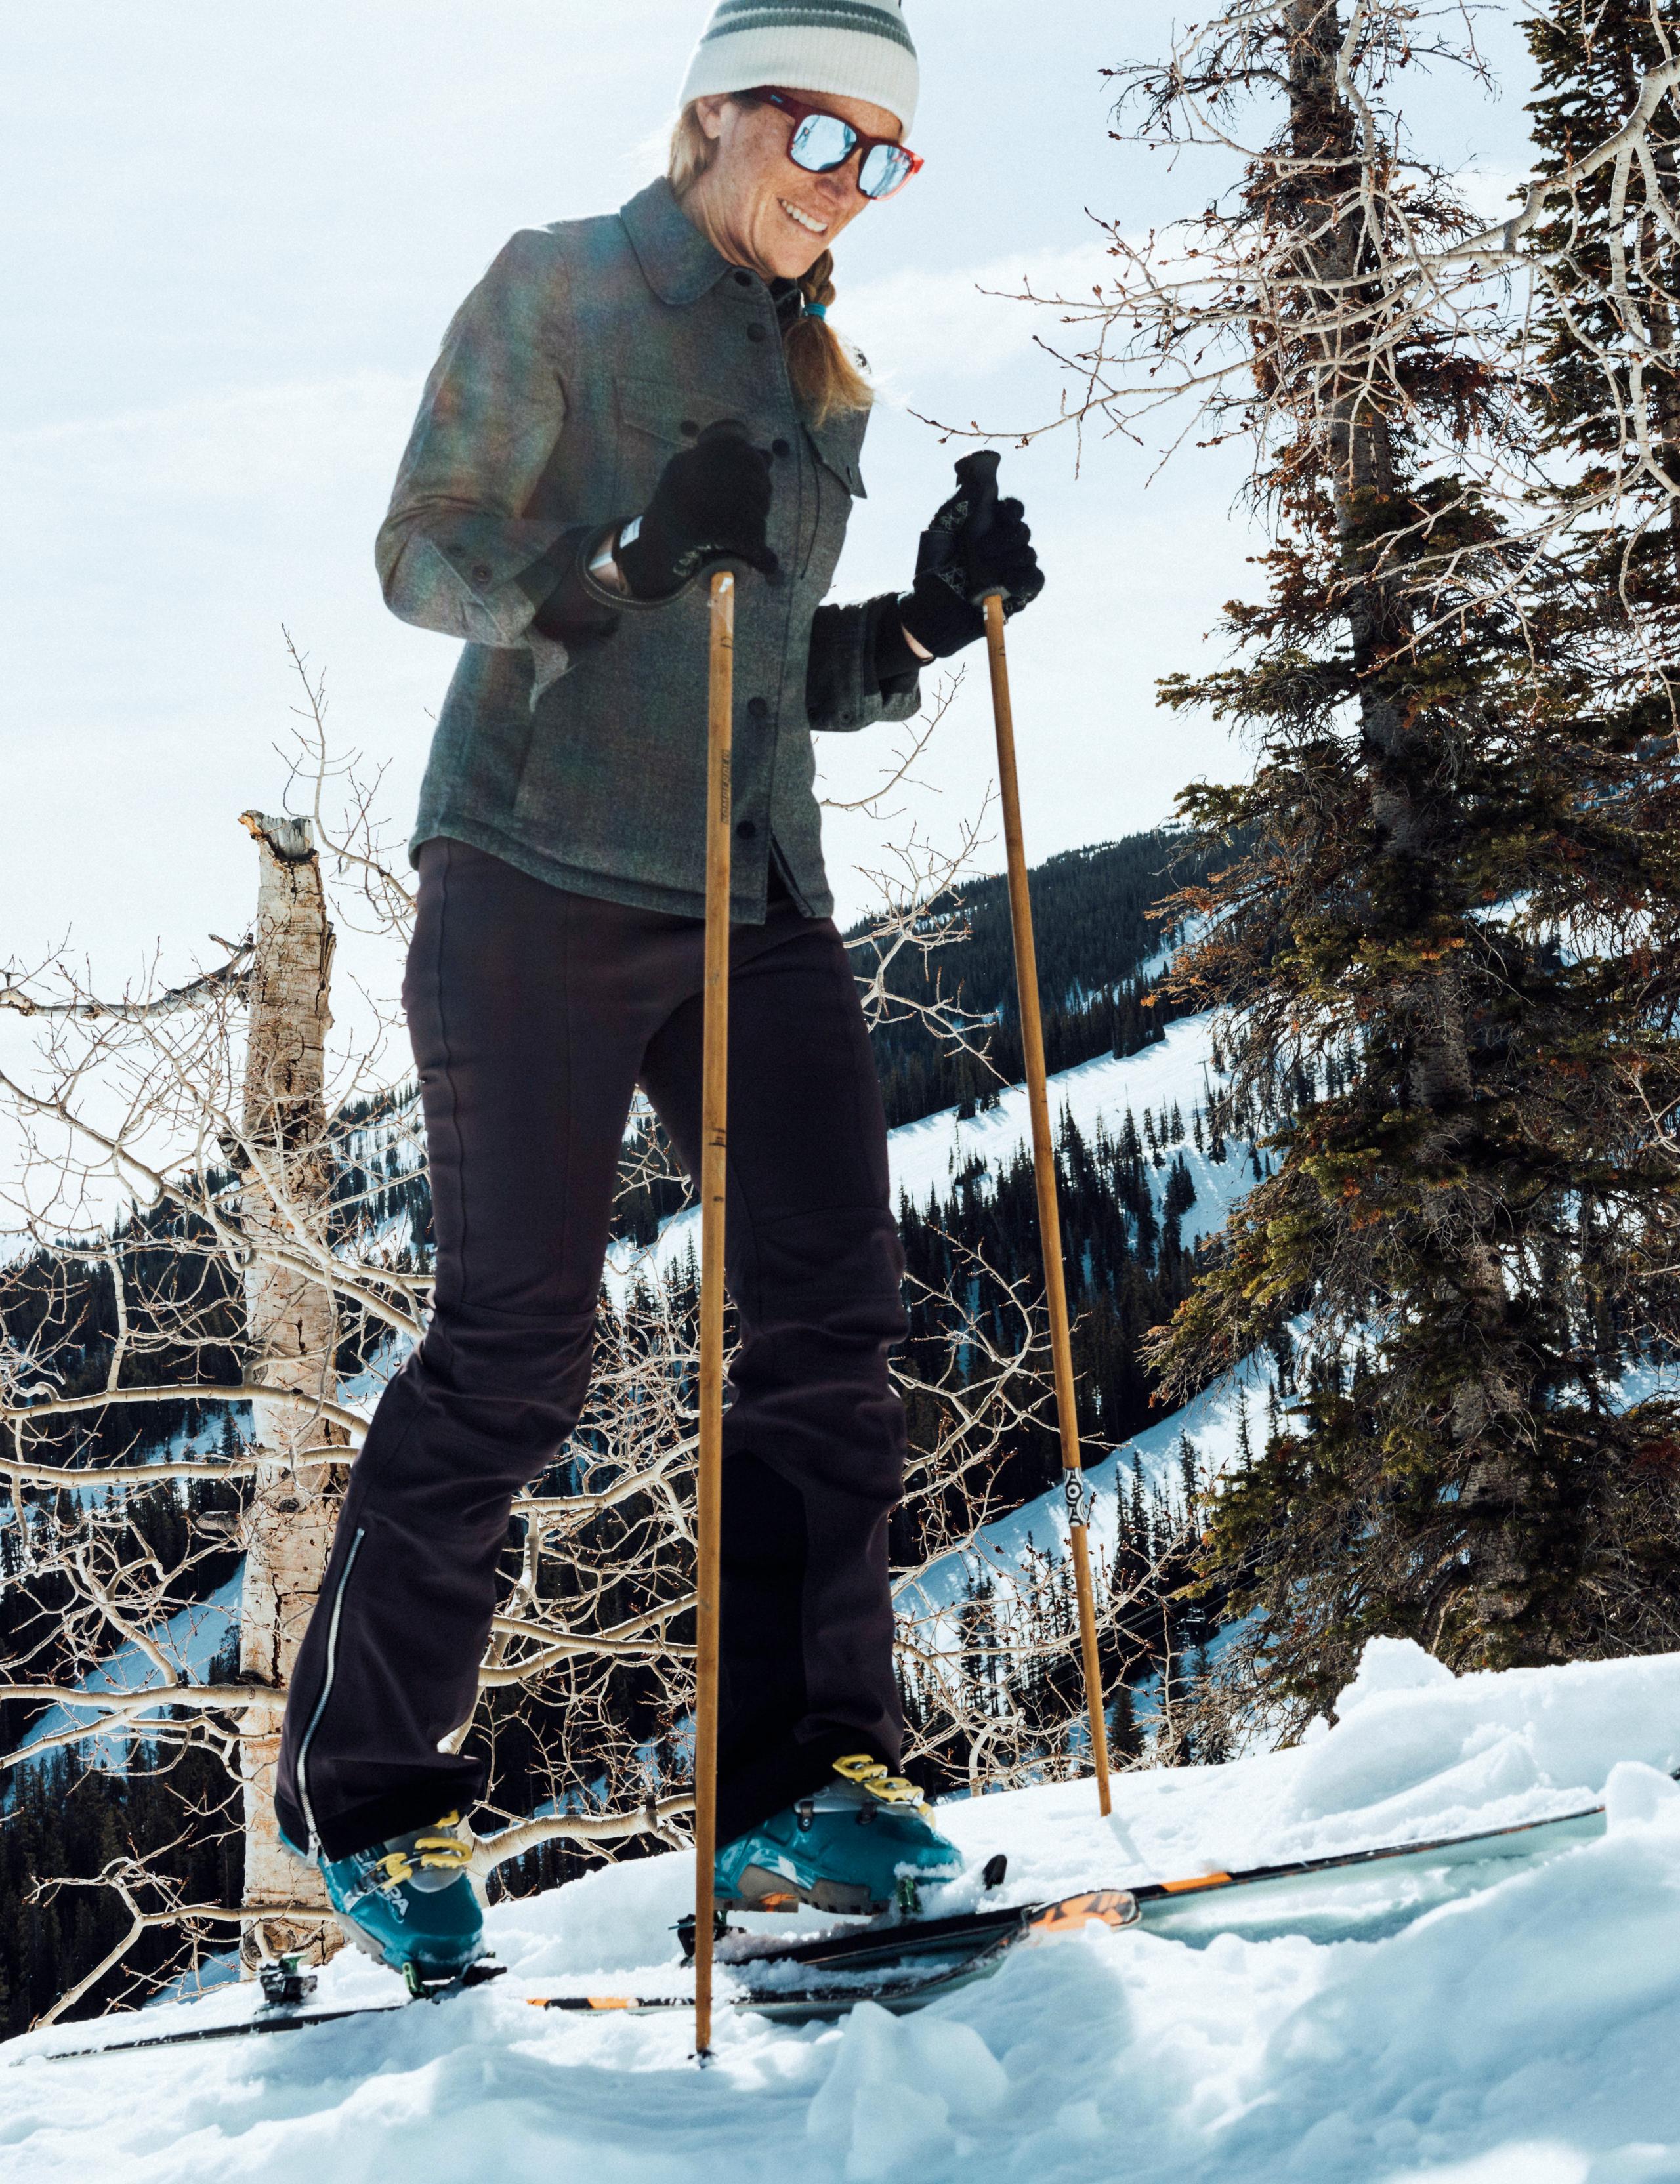 Women in W Traction Insulated Shirt skinning up snow mountain